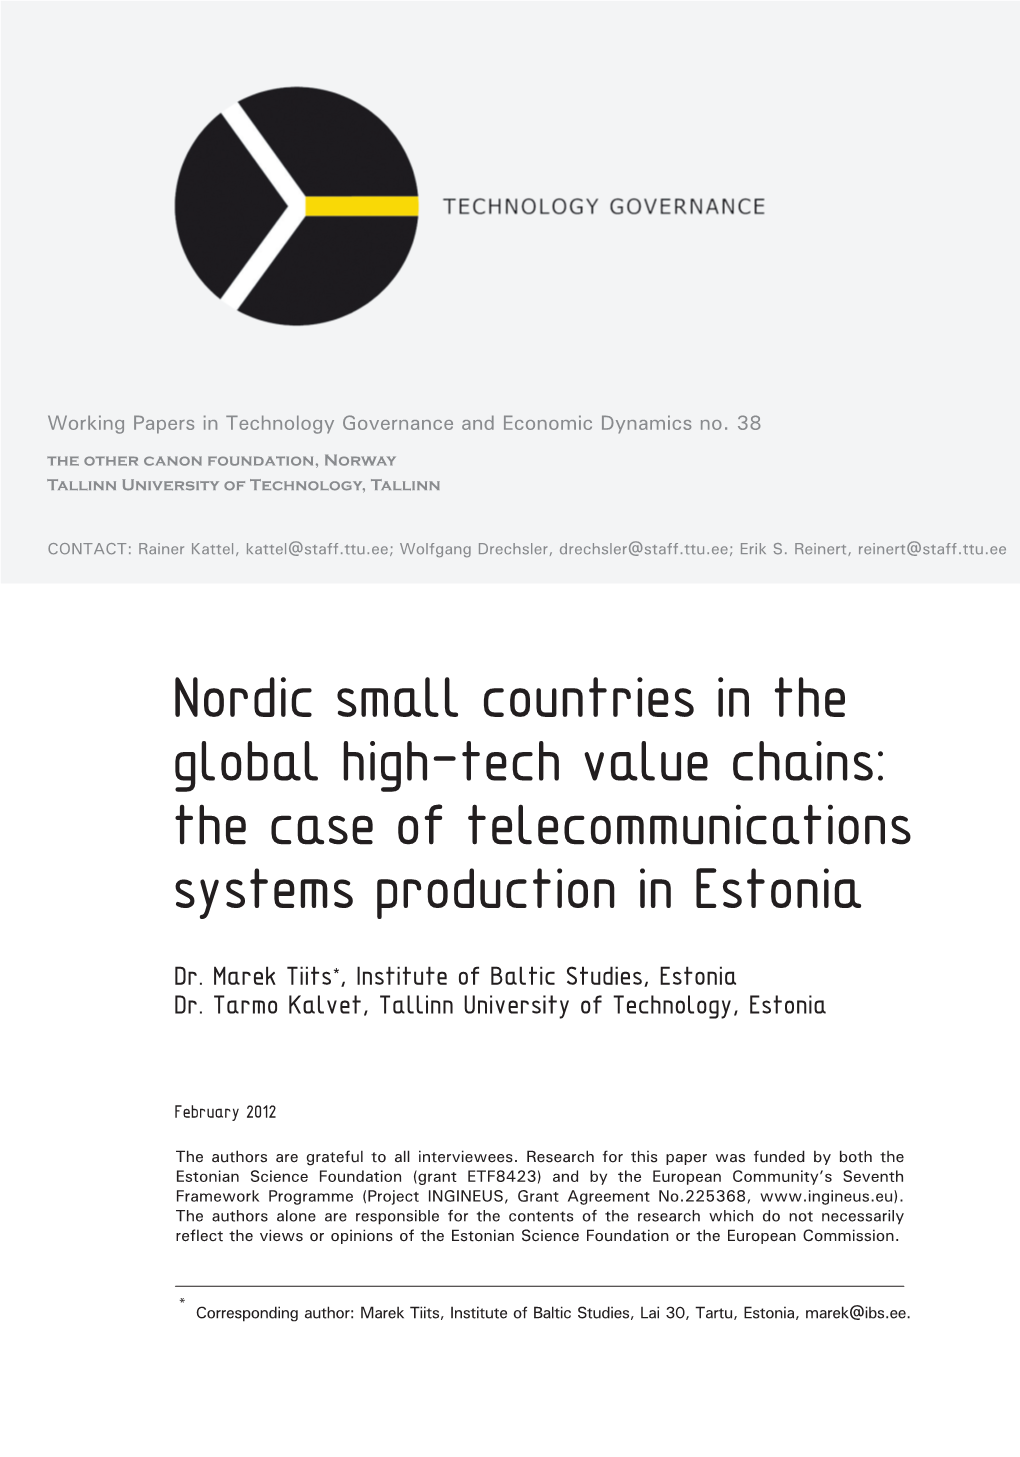 The Case of Telecommunications Systems Production in Estonia